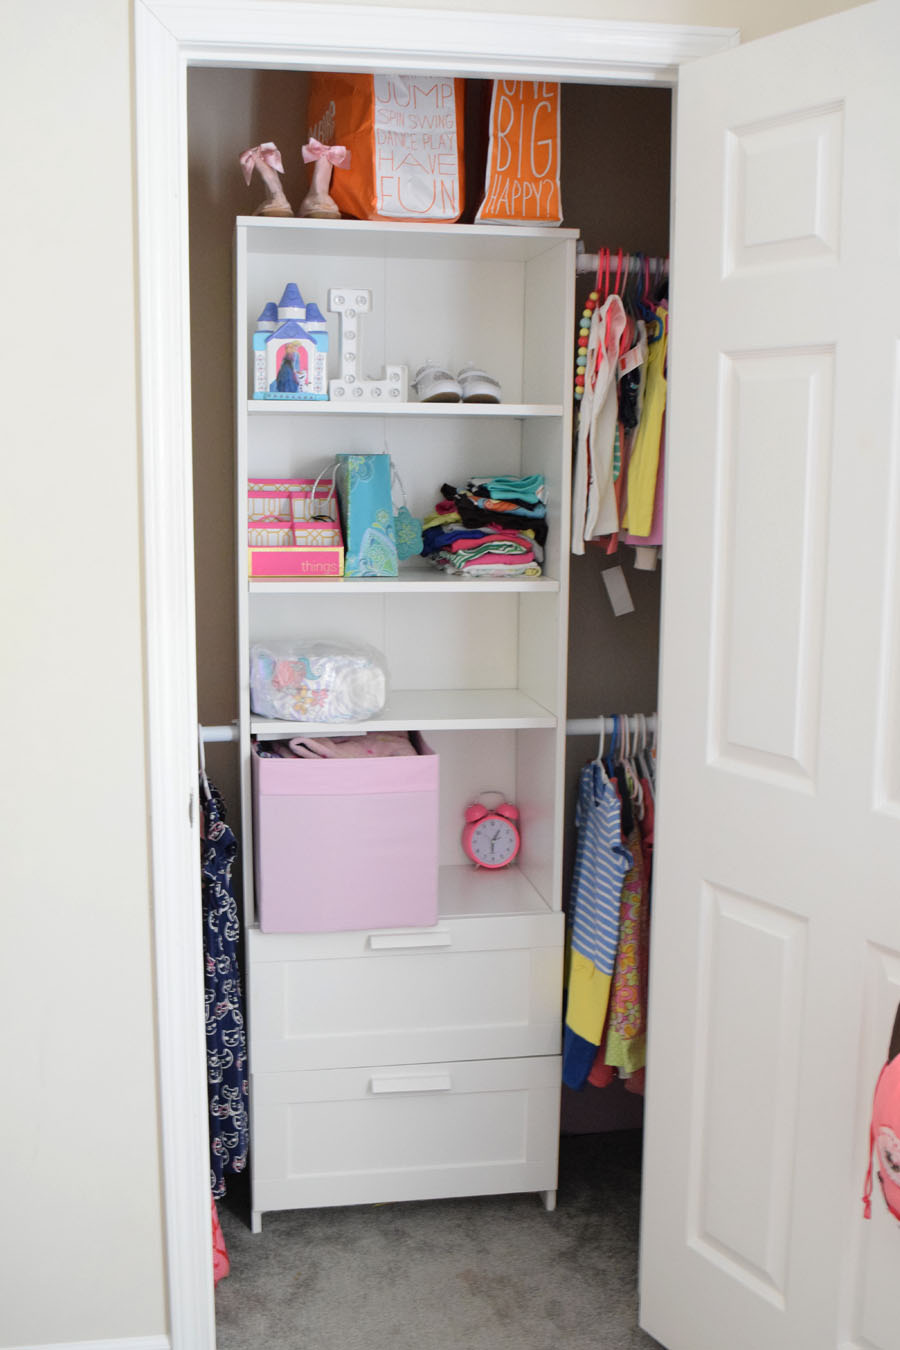 How to Fit Two Girls in One Bedroom and Still Have Room to Move - The ...